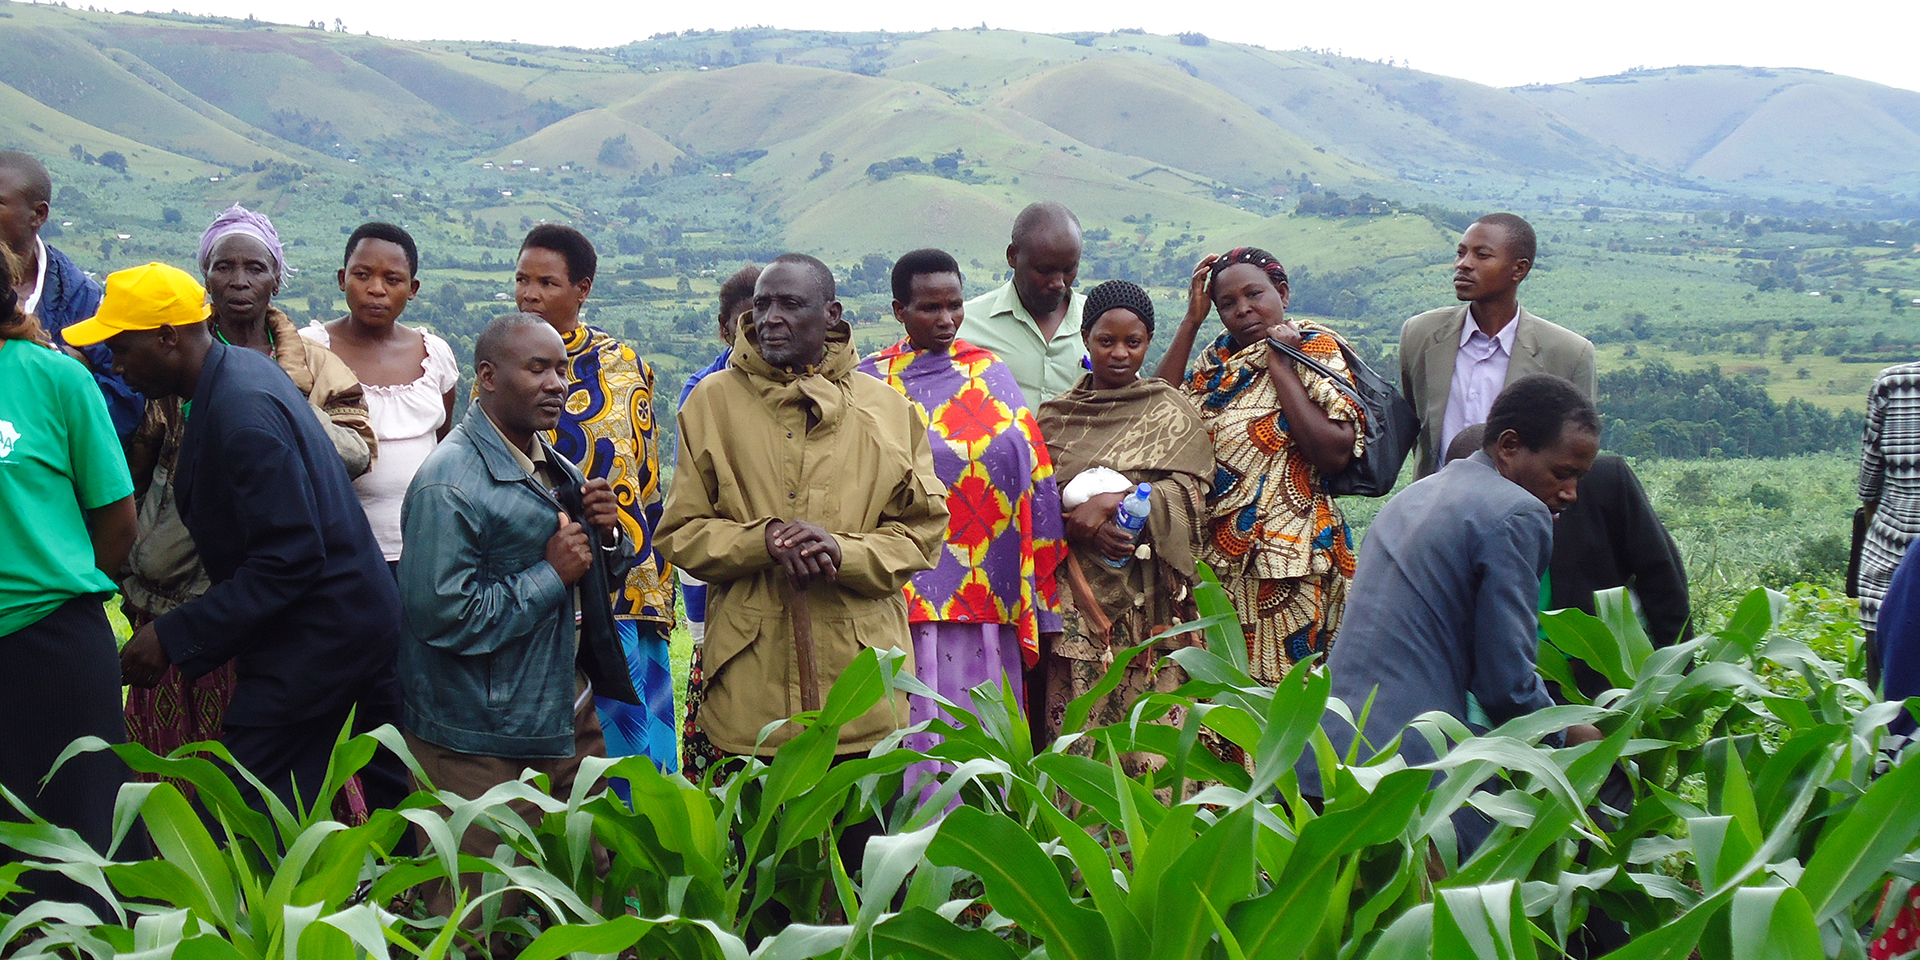 A large group of farmers standing in a field with a lush, mountainous landscape in the background.